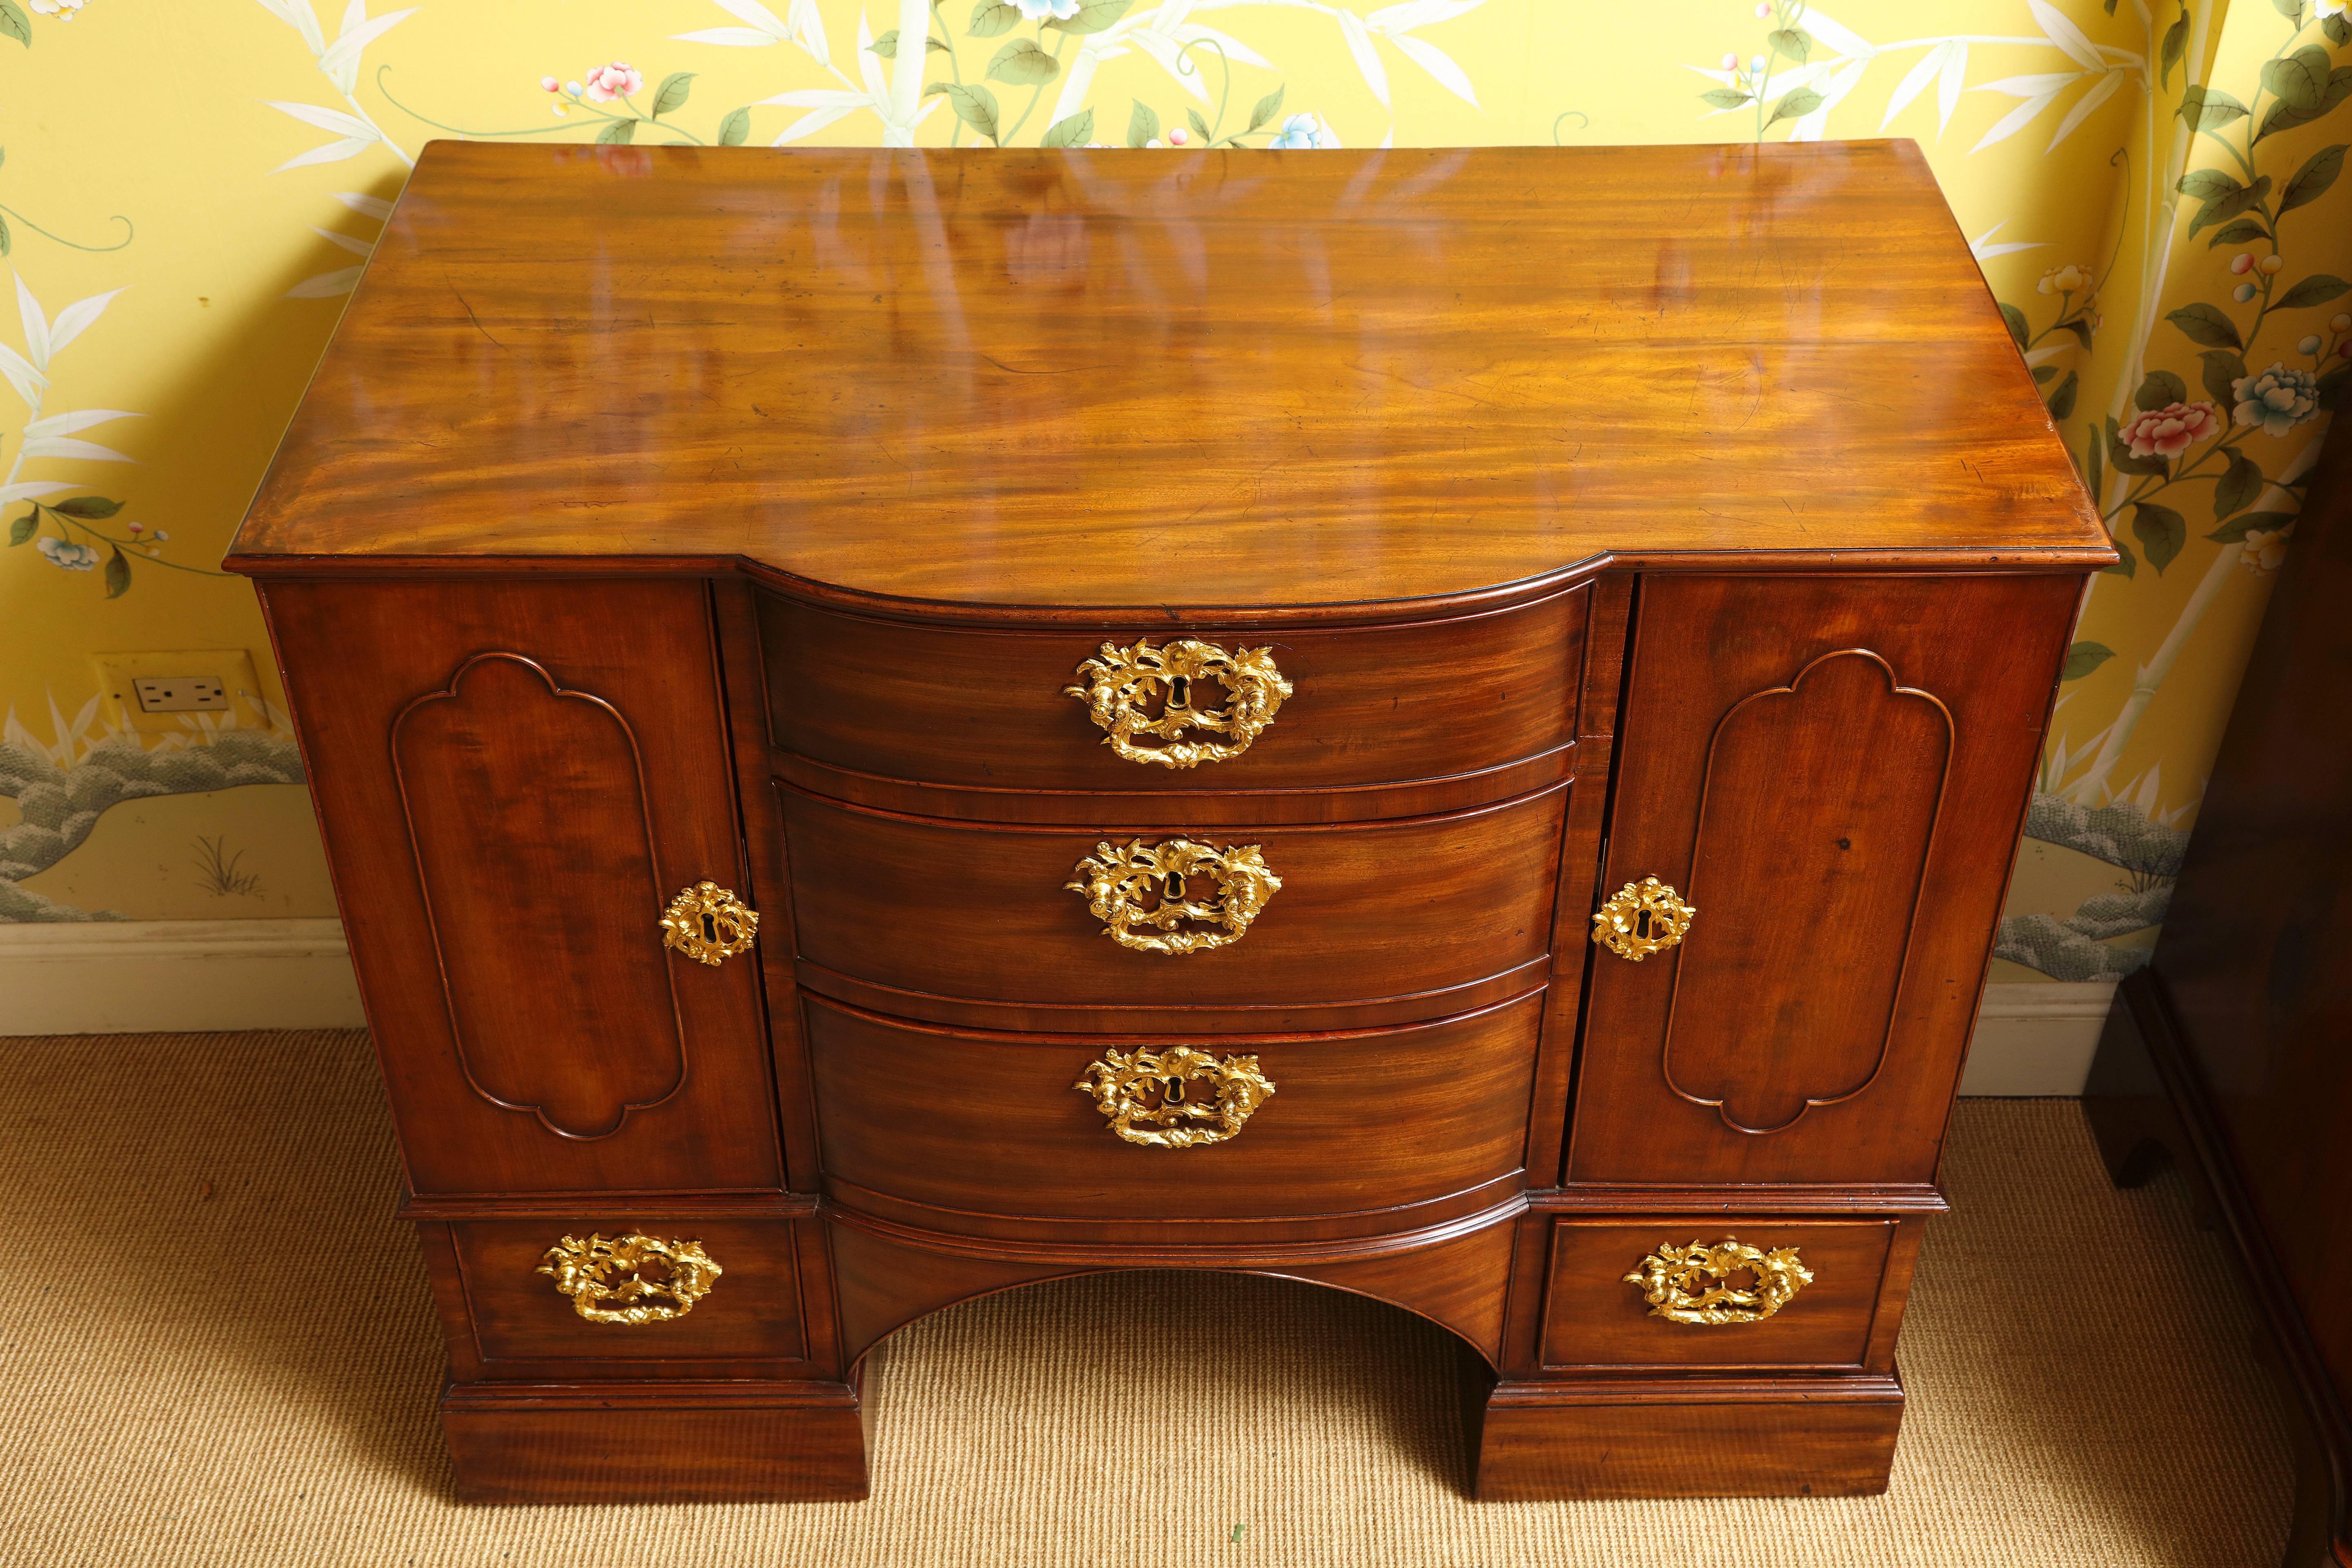 Chippendale George III Period Ormolu-Mounted Mahogany Commode, English, circa 1760 For Sale